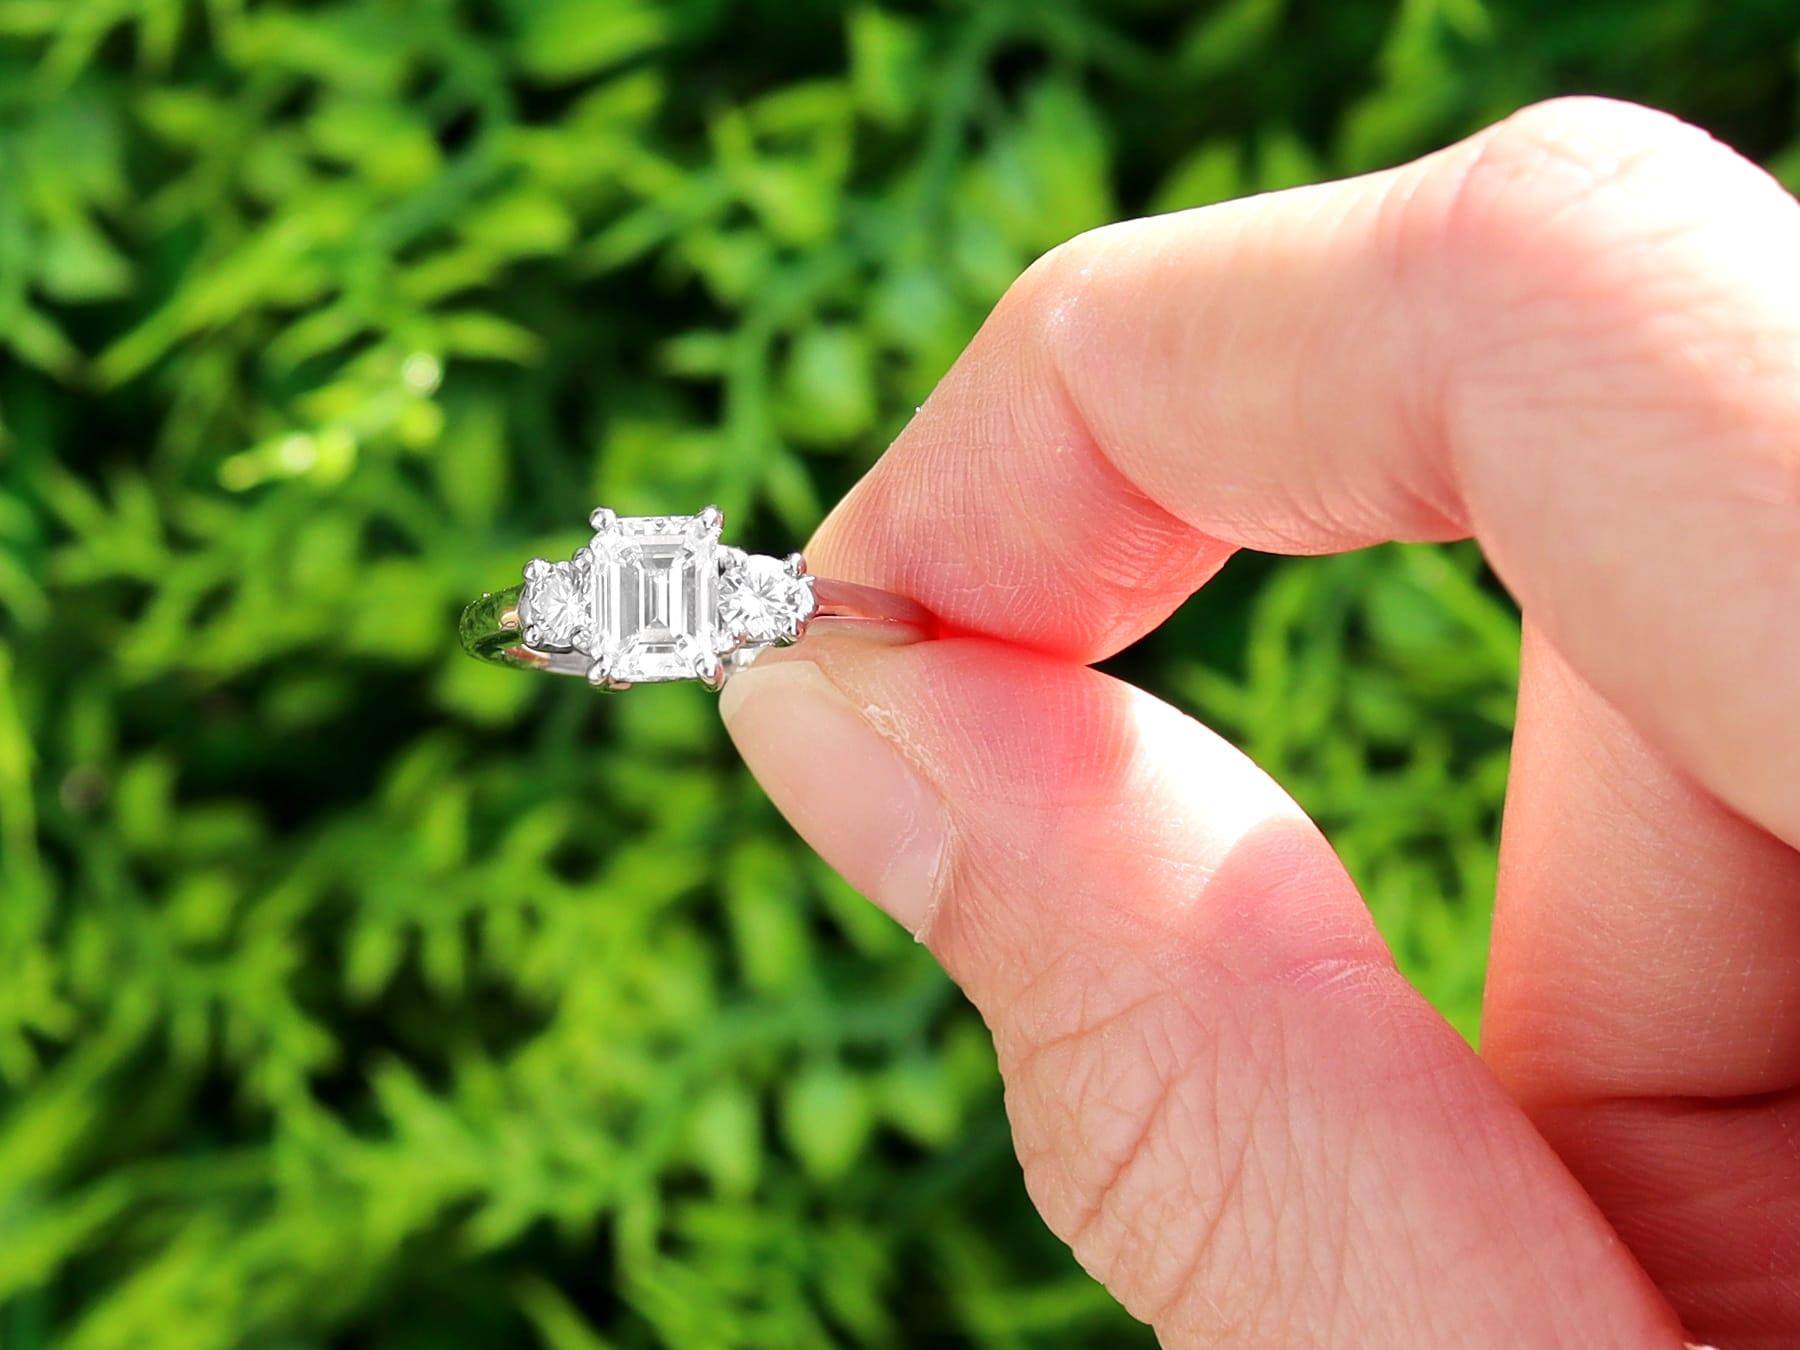 An exceptional, fine and impressive contemporary 1.04 carat emerald cut diamond solitaire with diamond set shoulders, in 18 karat white gold; part of our contemporary jewelry / estate jewelry collections.

This impressive contemporary emerald cut